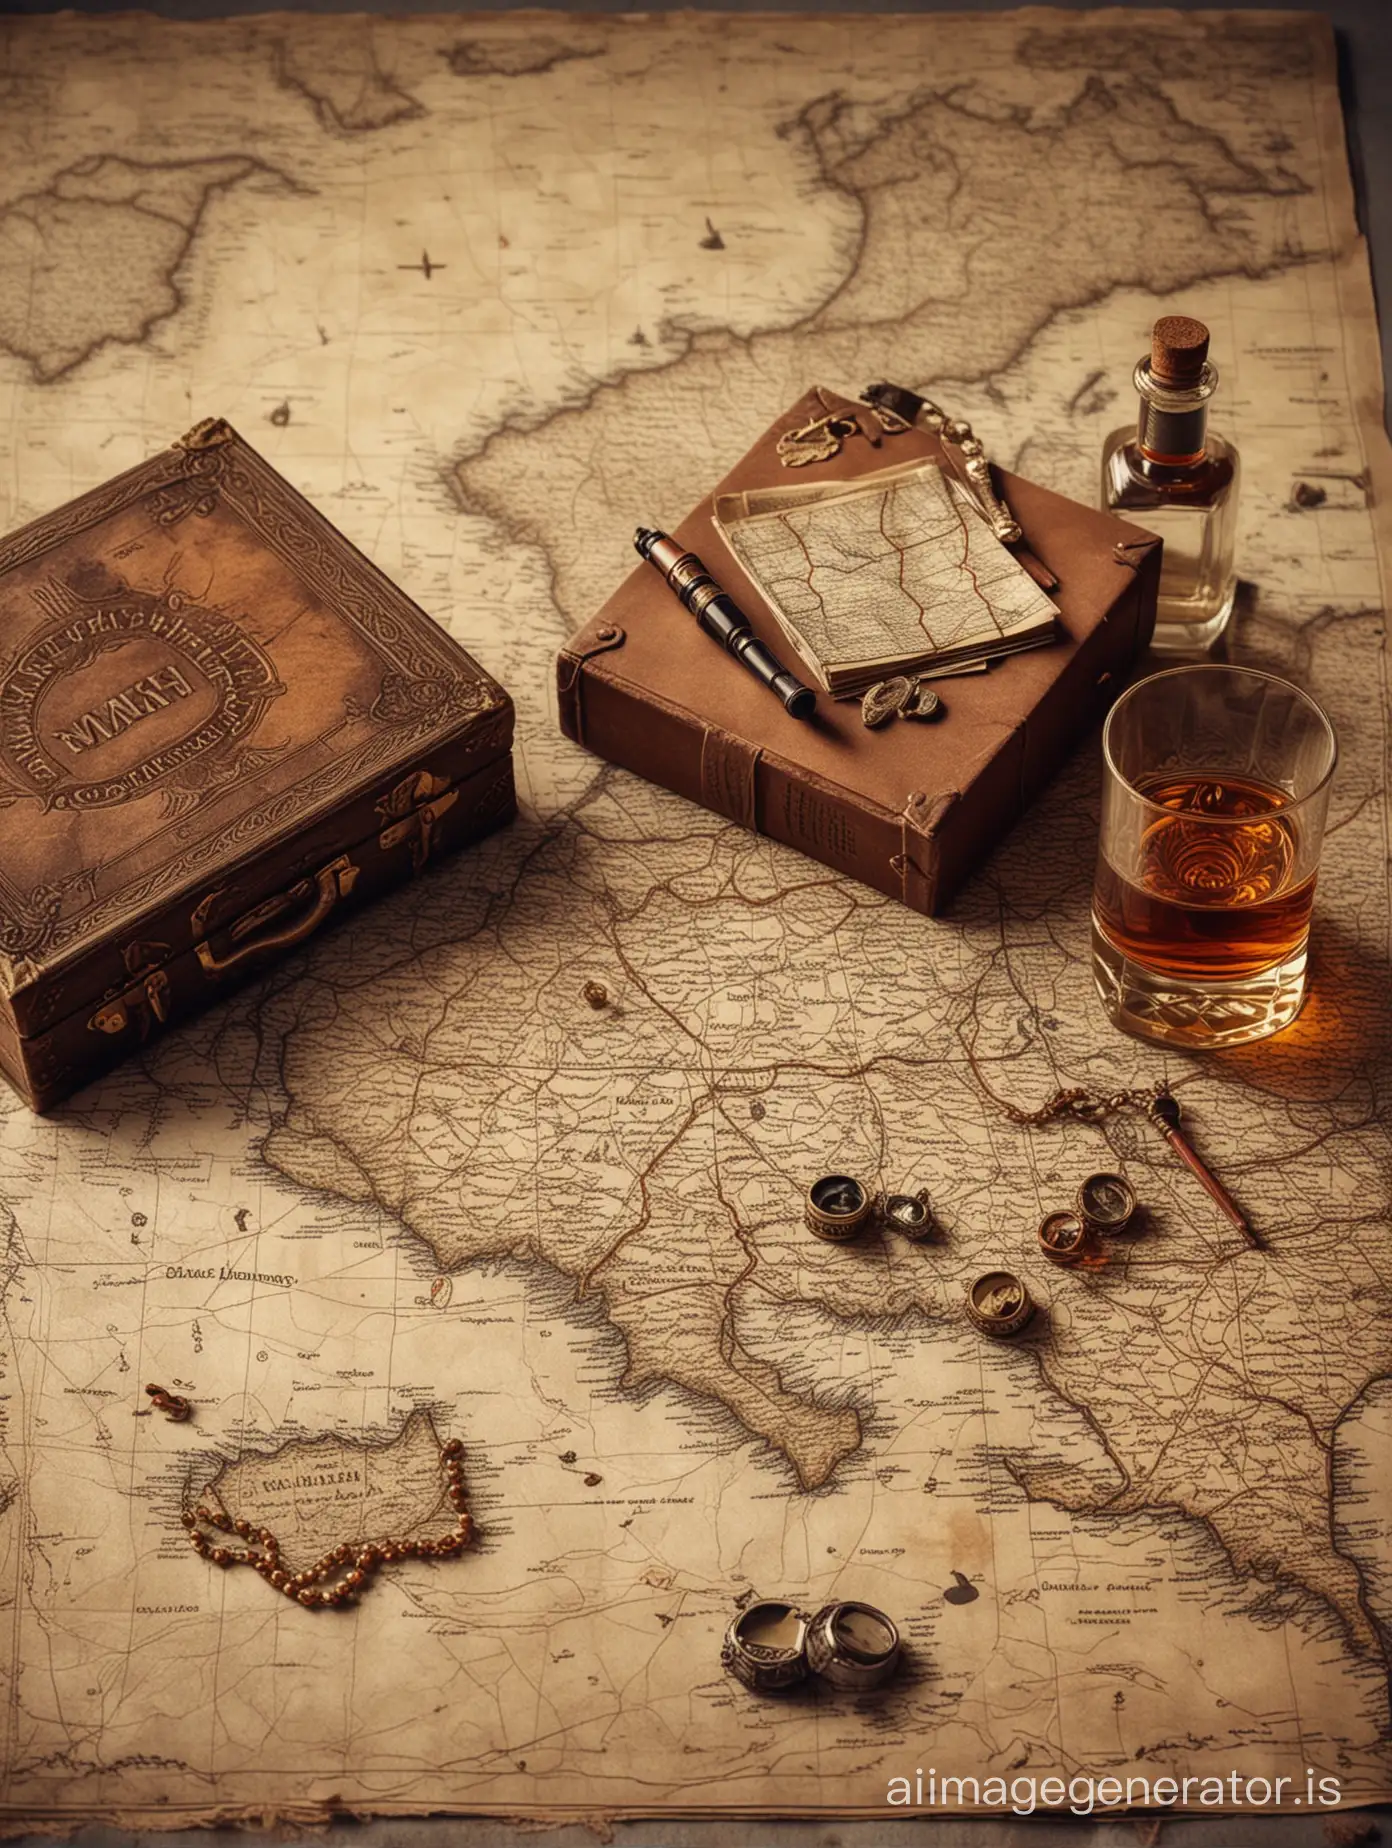 on a gray textured background, a stylized image of the surface of an ancient map spread out on a rectangular table, there is a stack of old travel books, next to it is a glass of expensive whiskey and a bottle of this expensive whiskey, a detective's magnifying glass lies on the map and there is a small jewelry casket with jewelry